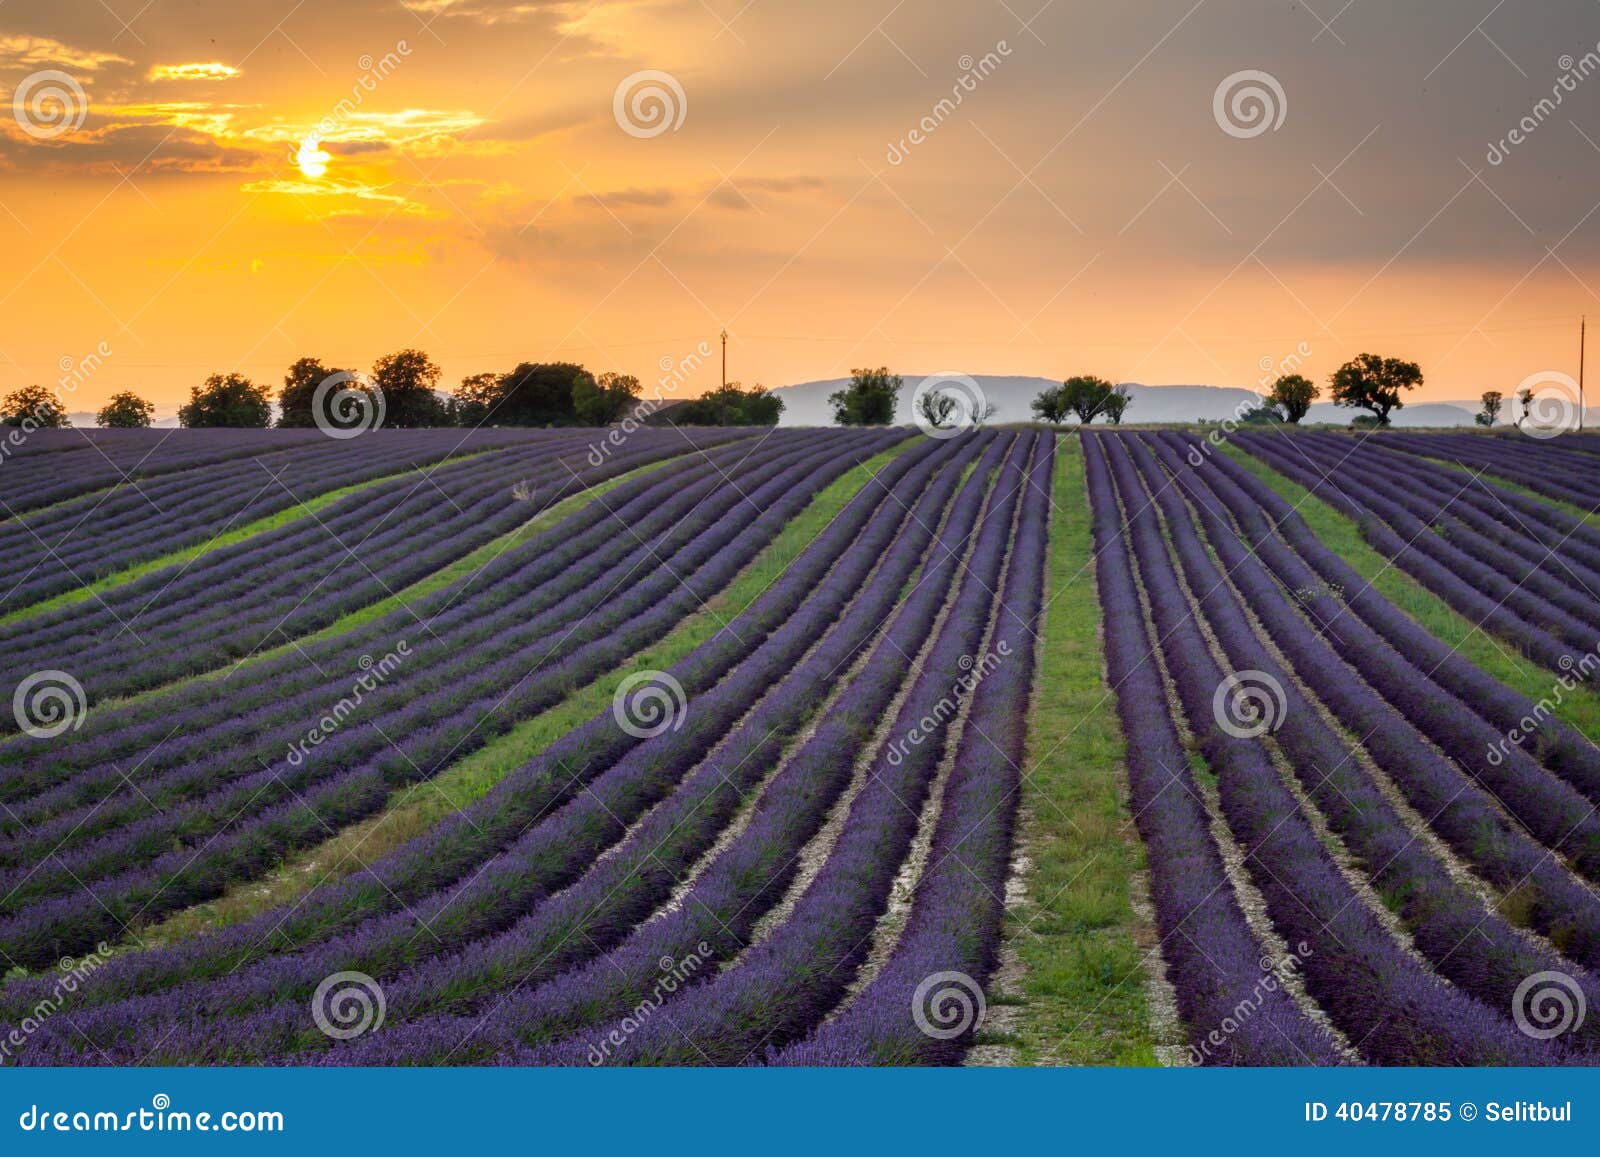 sunset over rows of lavender near valensole, provence, france